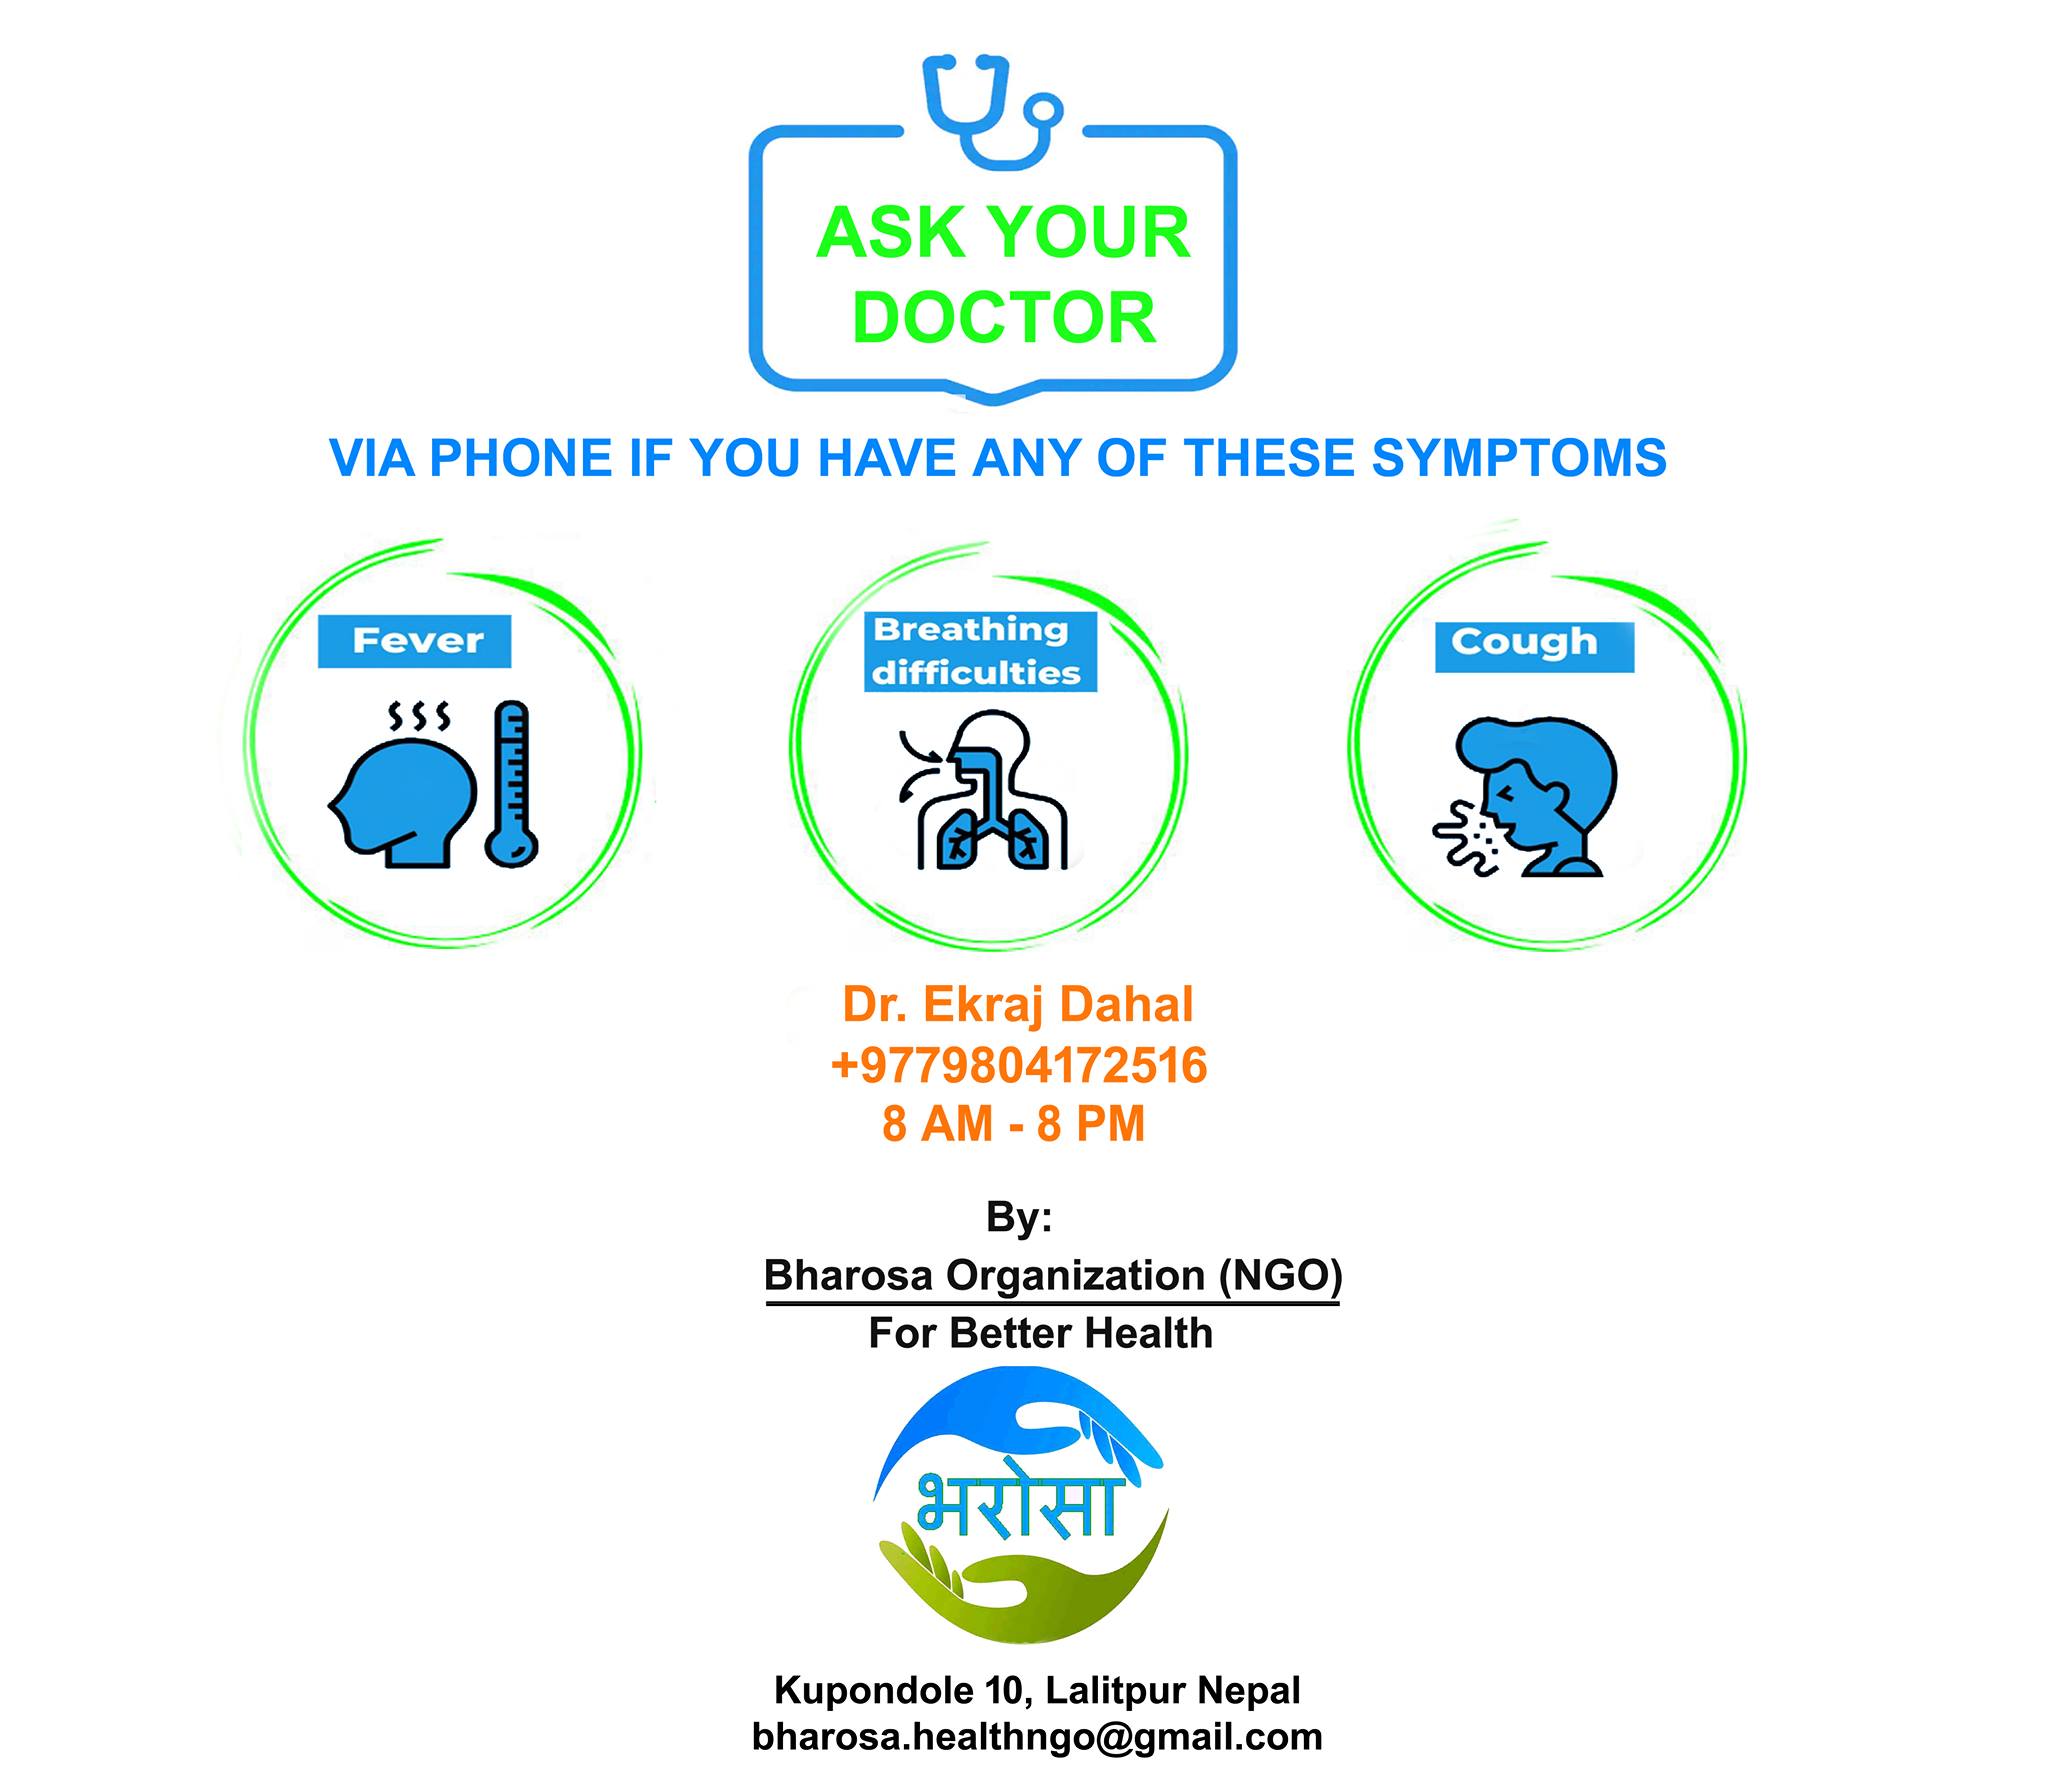 ASK YOUR DOCTOR Campaign